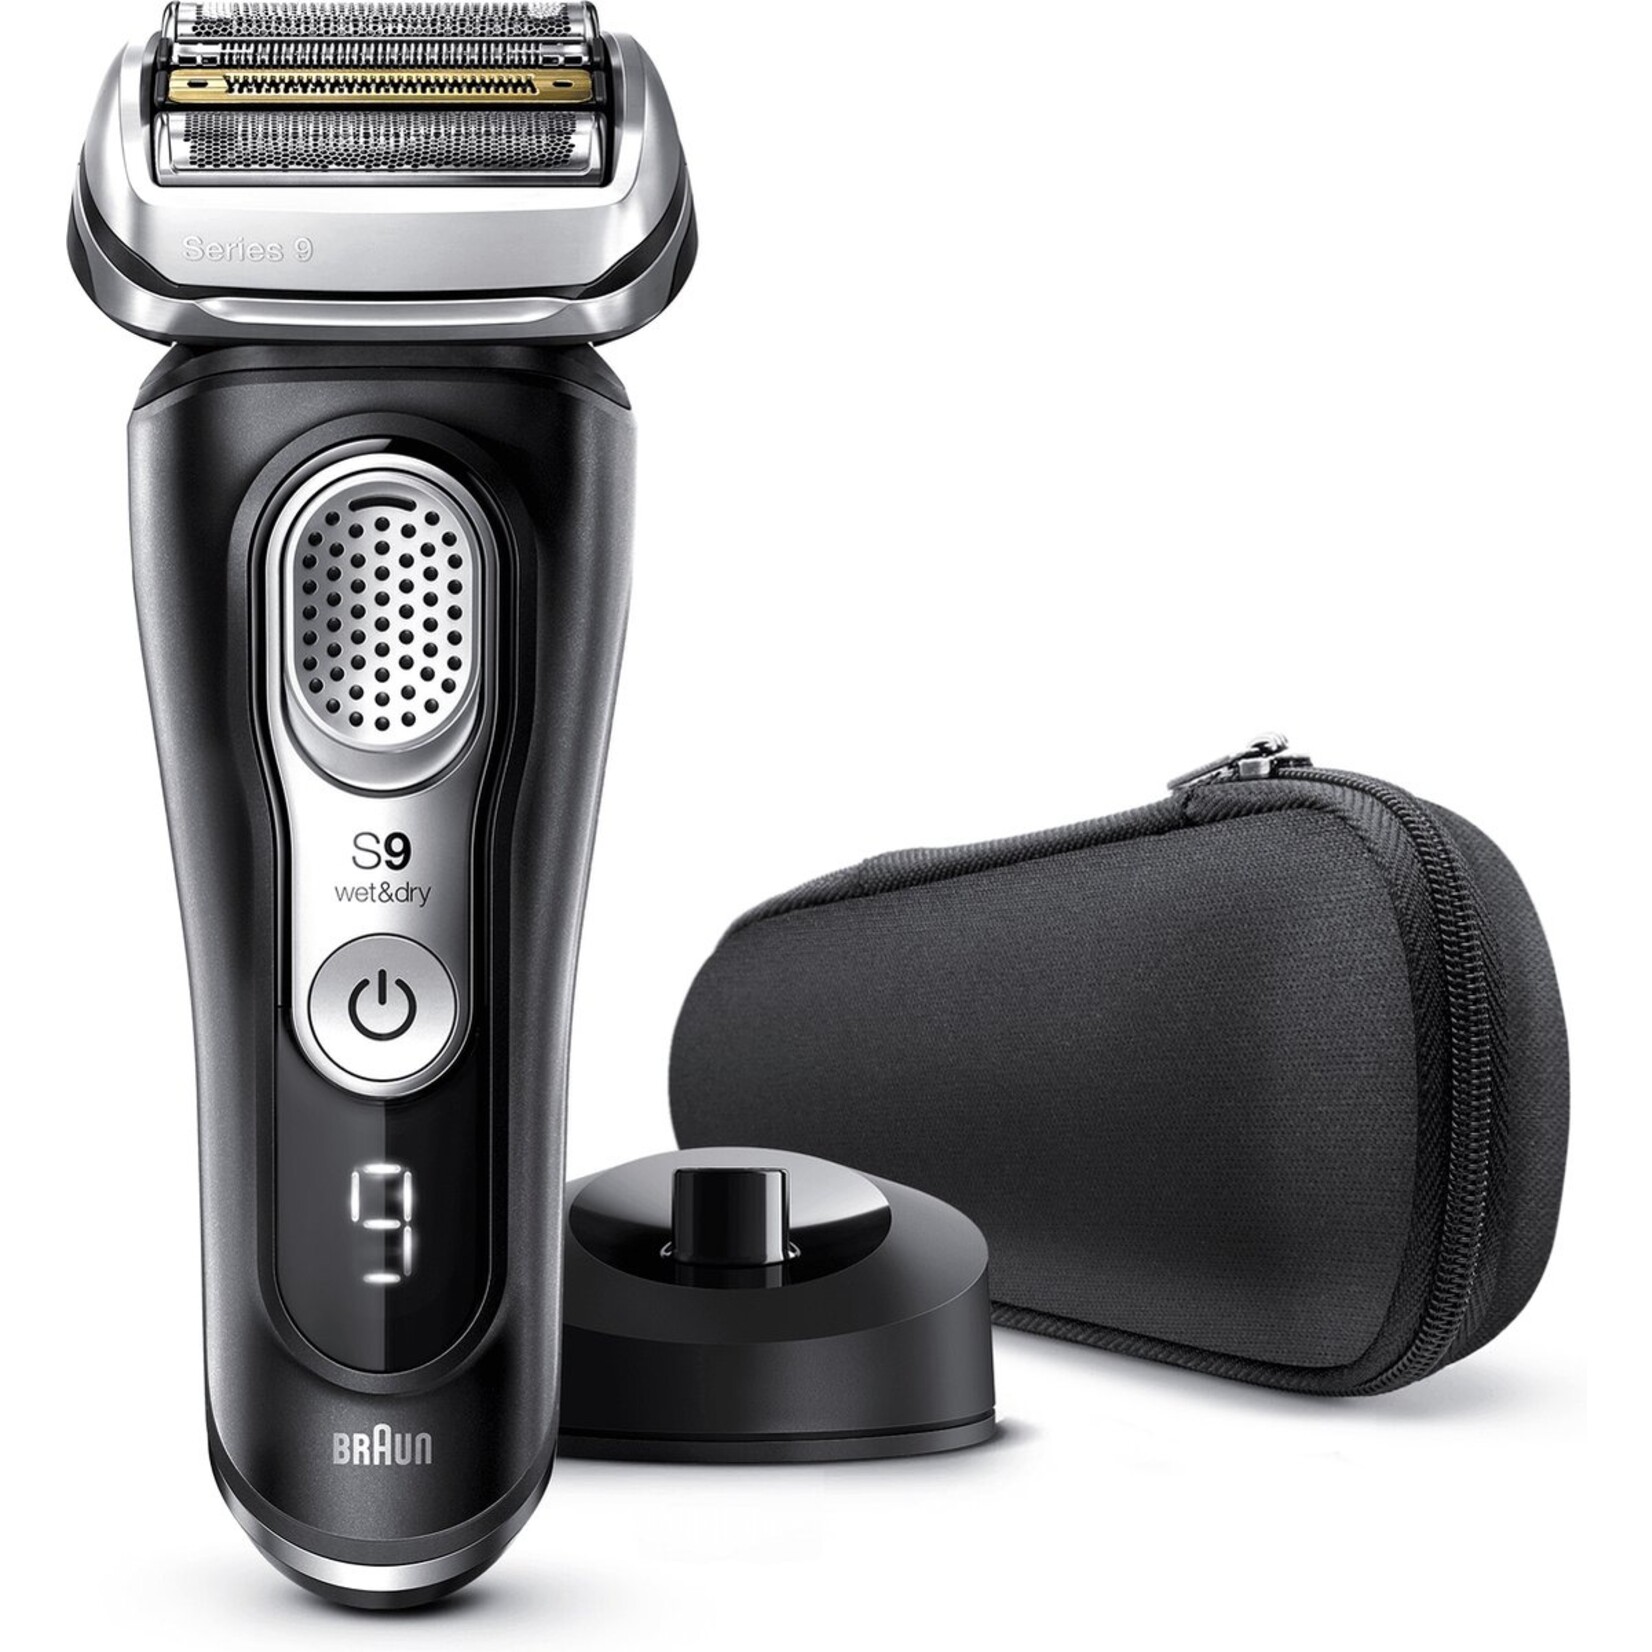 Braun Braun Series 9 9340s Black - Electric Shaver with Charging Stand